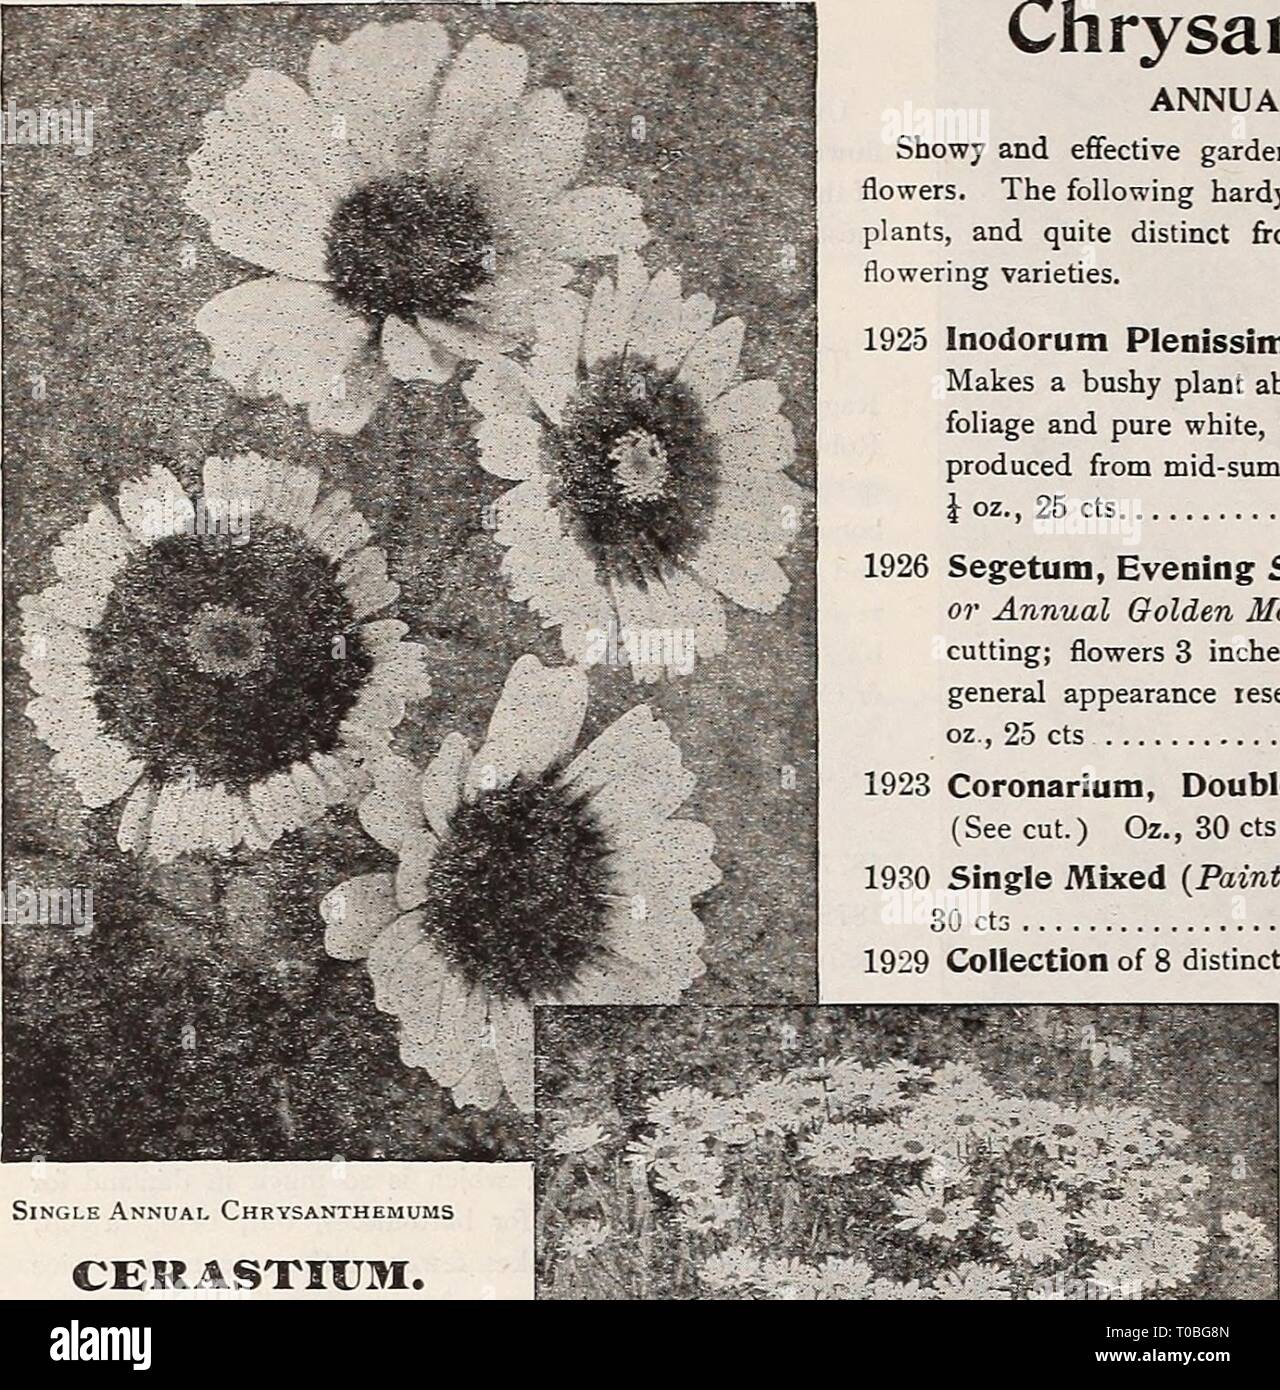 Dreer's garden book 1917 (1917) Dreer's garden book 1917 dreersgardenbook1917henr Year: 1917  78 njl HBBrADRffl--PIIIIADftPmA--PA LIABLE FLOWER SEEDS    Single Annual Chrysanthemums CERASTKJM. (Snow in Summer.) PER PKT. 1911 Tomentosum. A very pretty dwarf, white-leaved edging plant, bearing small white flowers; hardy peren- nial â 15 Chrysanthemums. PERENNIAL VARIETIES. 1944 Japanese Hybrids. Our stock of this comes to us di- rect from Japan, and is saved from a magnificent collection of over one hundred varieties, and cannot fail to produce satisfactory results. Seed sown in spring will prod Stock Photo